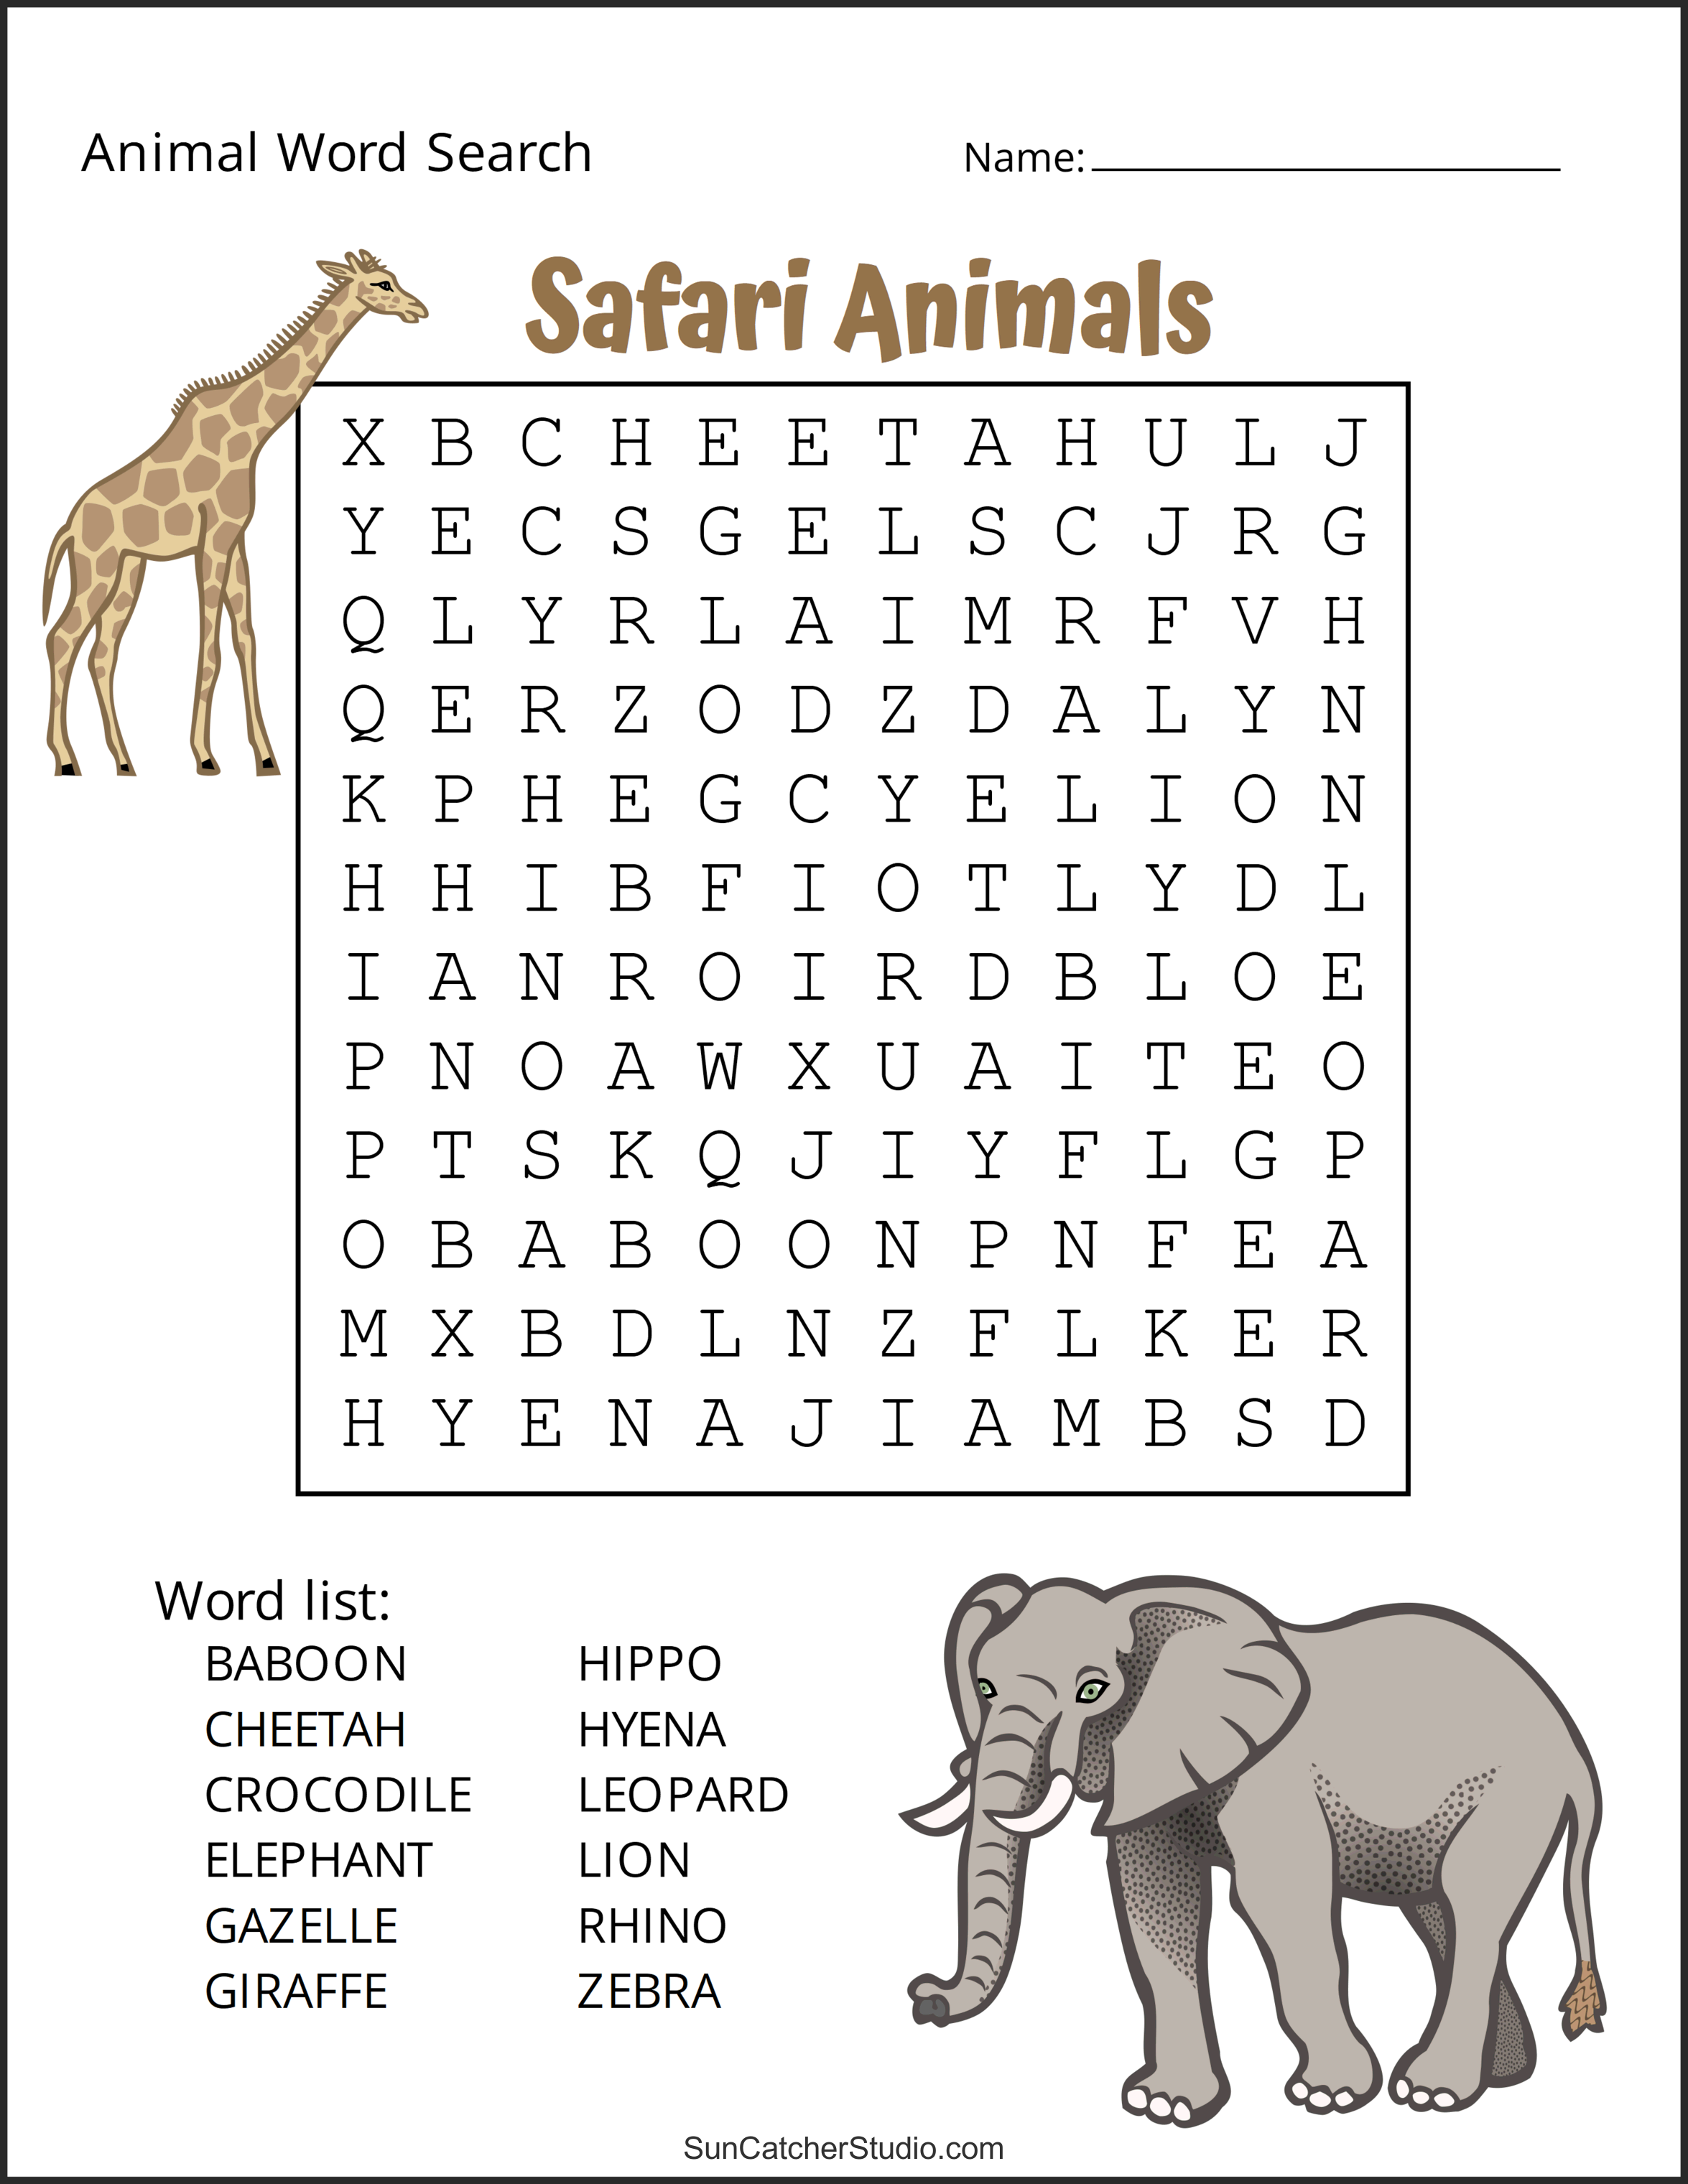 animal-word-search-free-printable-dog-pet-dinosaur-puzzles-diy-projects-patterns